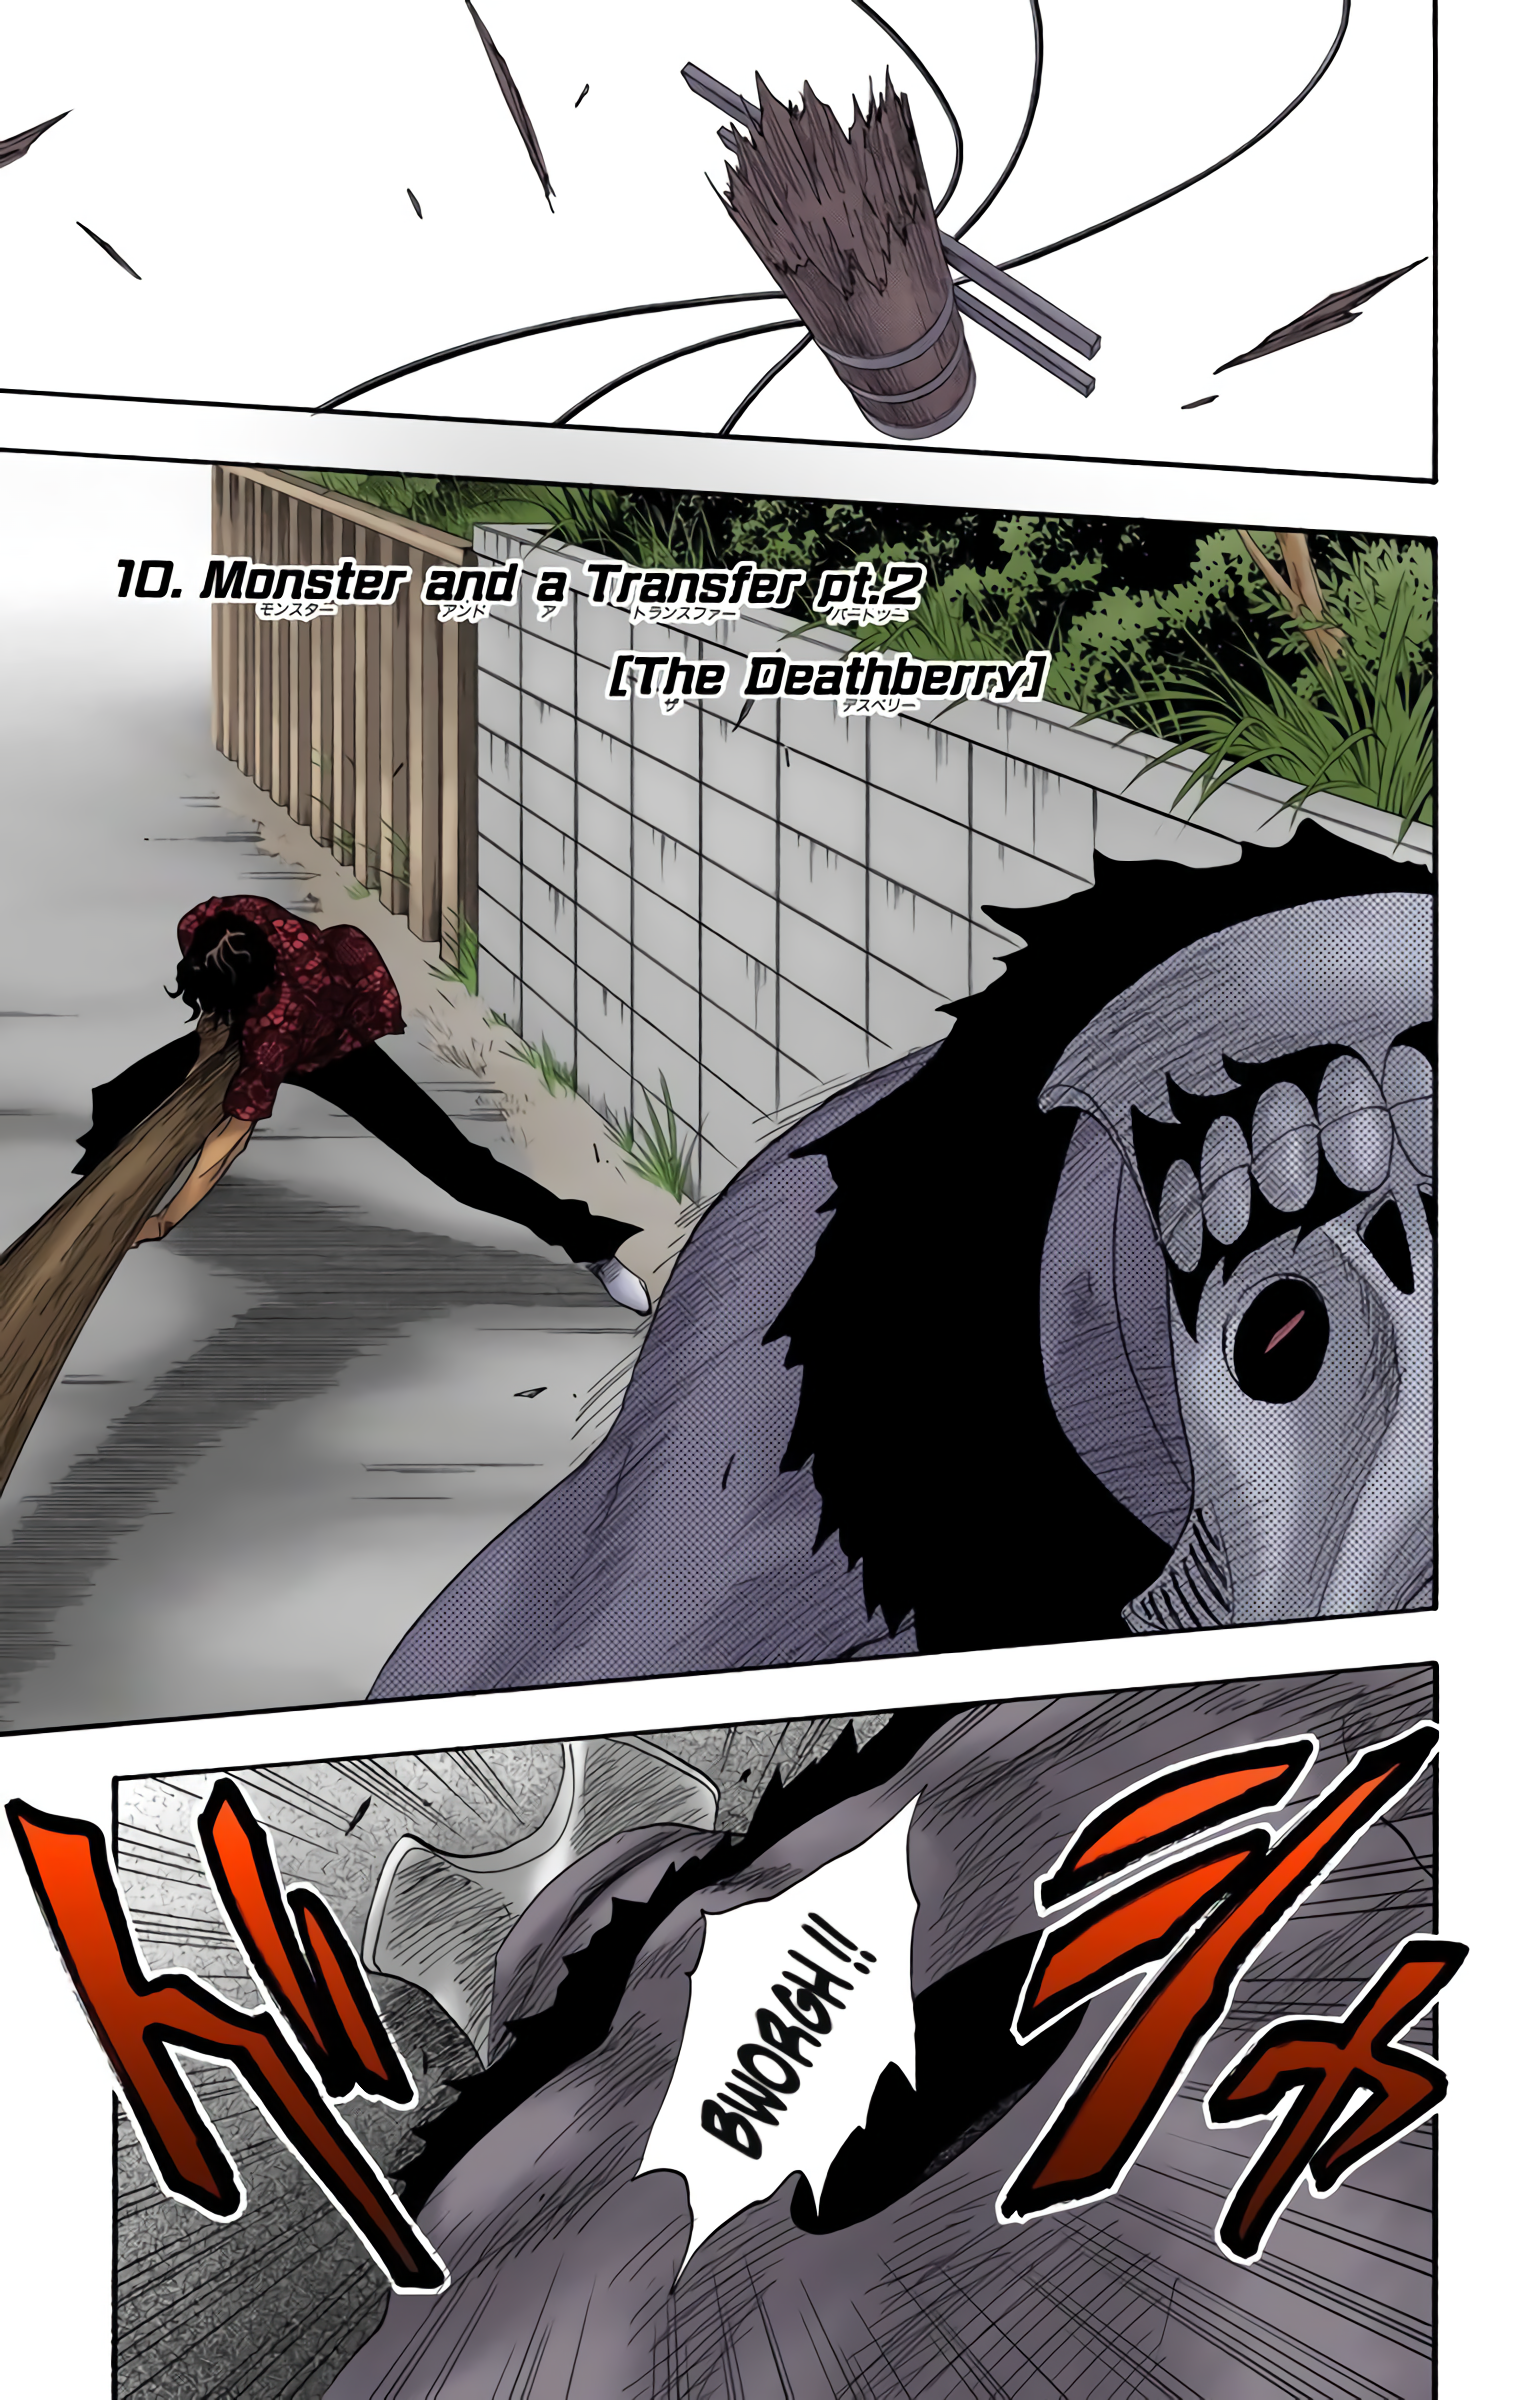 Bleach - Digital Colored Comics: Chapter 10.1 - Page 1